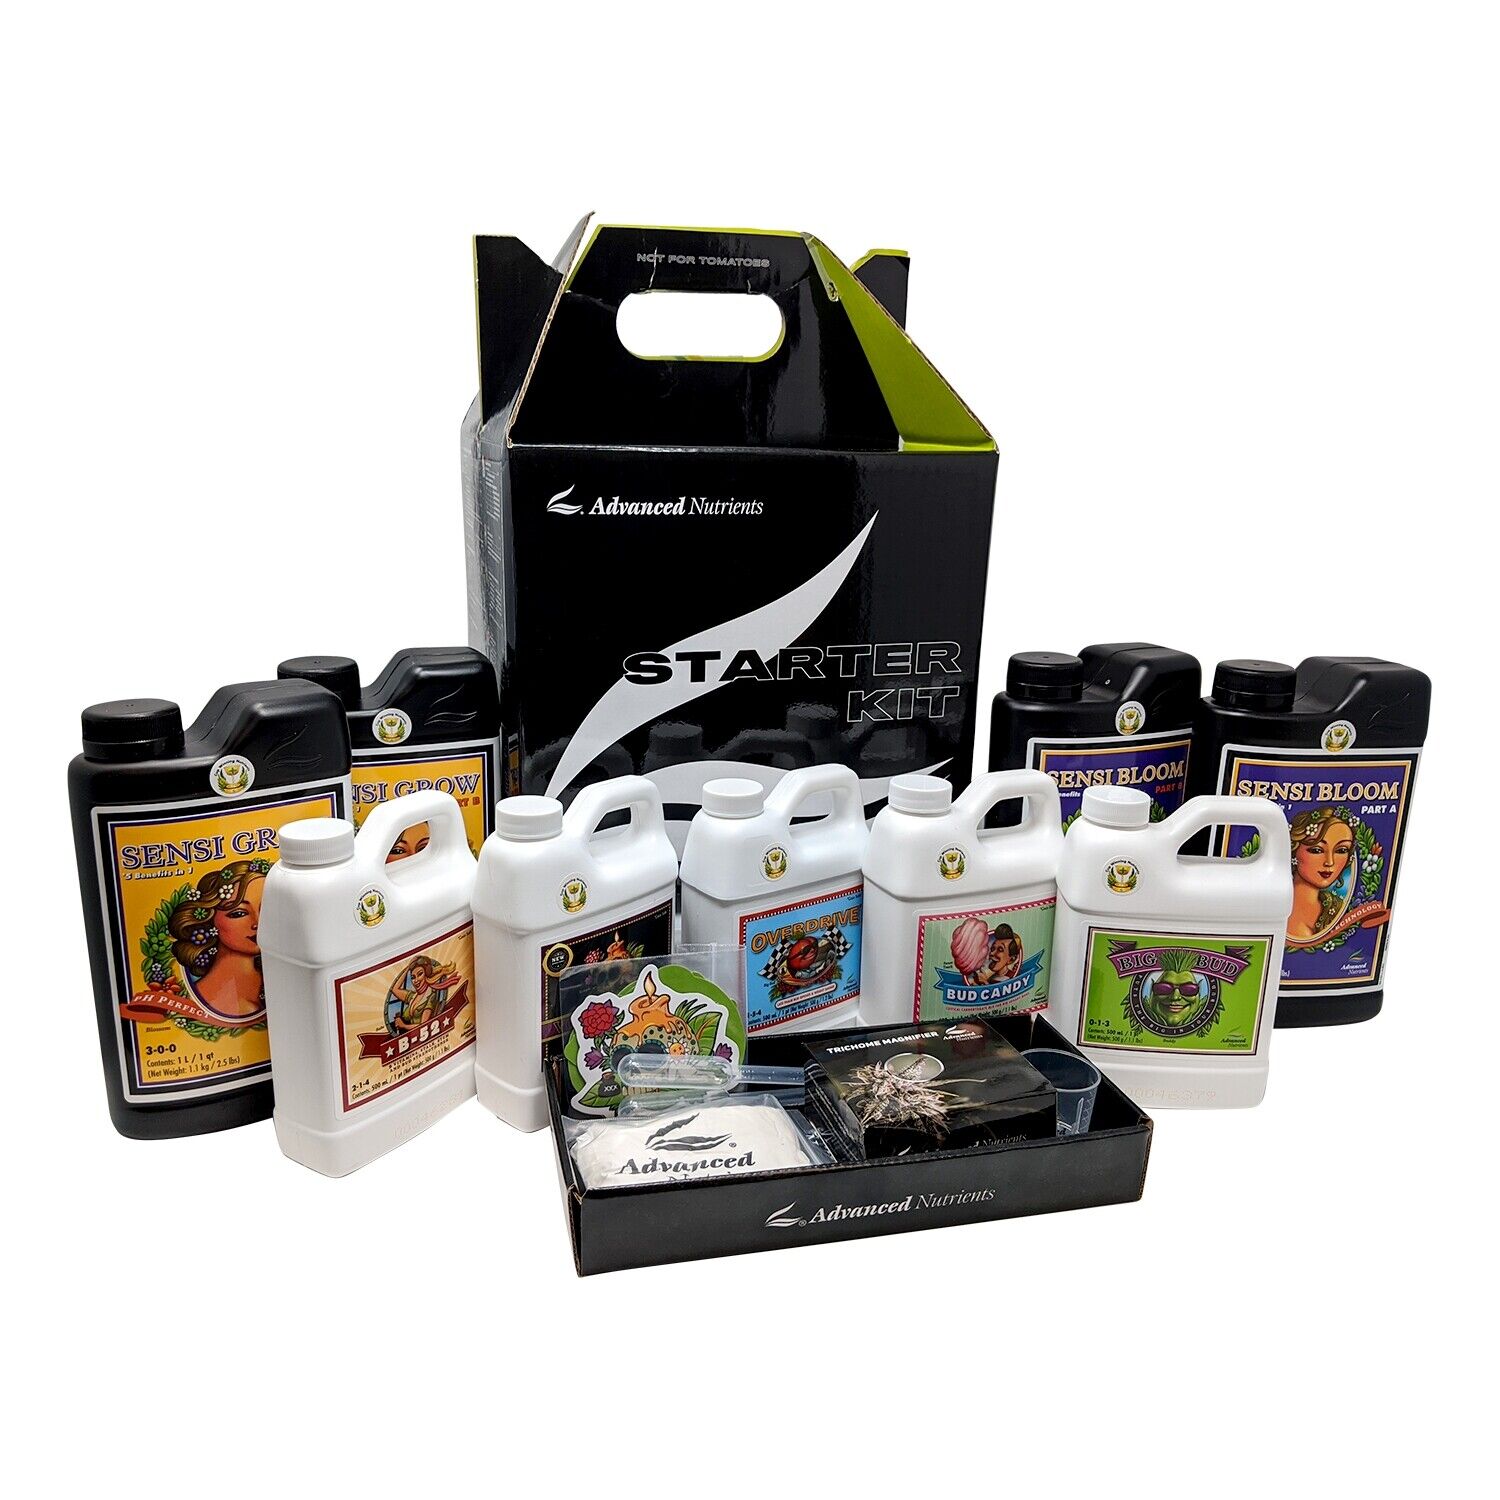 Advanced Nutrients Starter Kit - Contains Seven Key Nutrients